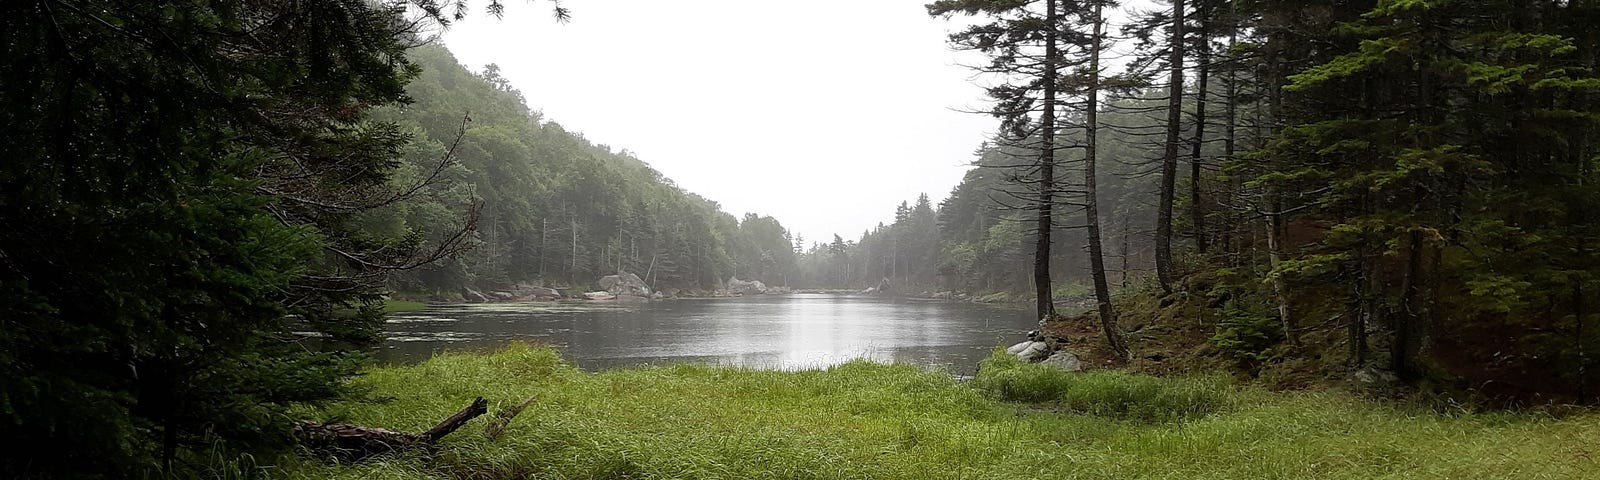 A misty afternoon view of Lost Pond, Gorham, NH